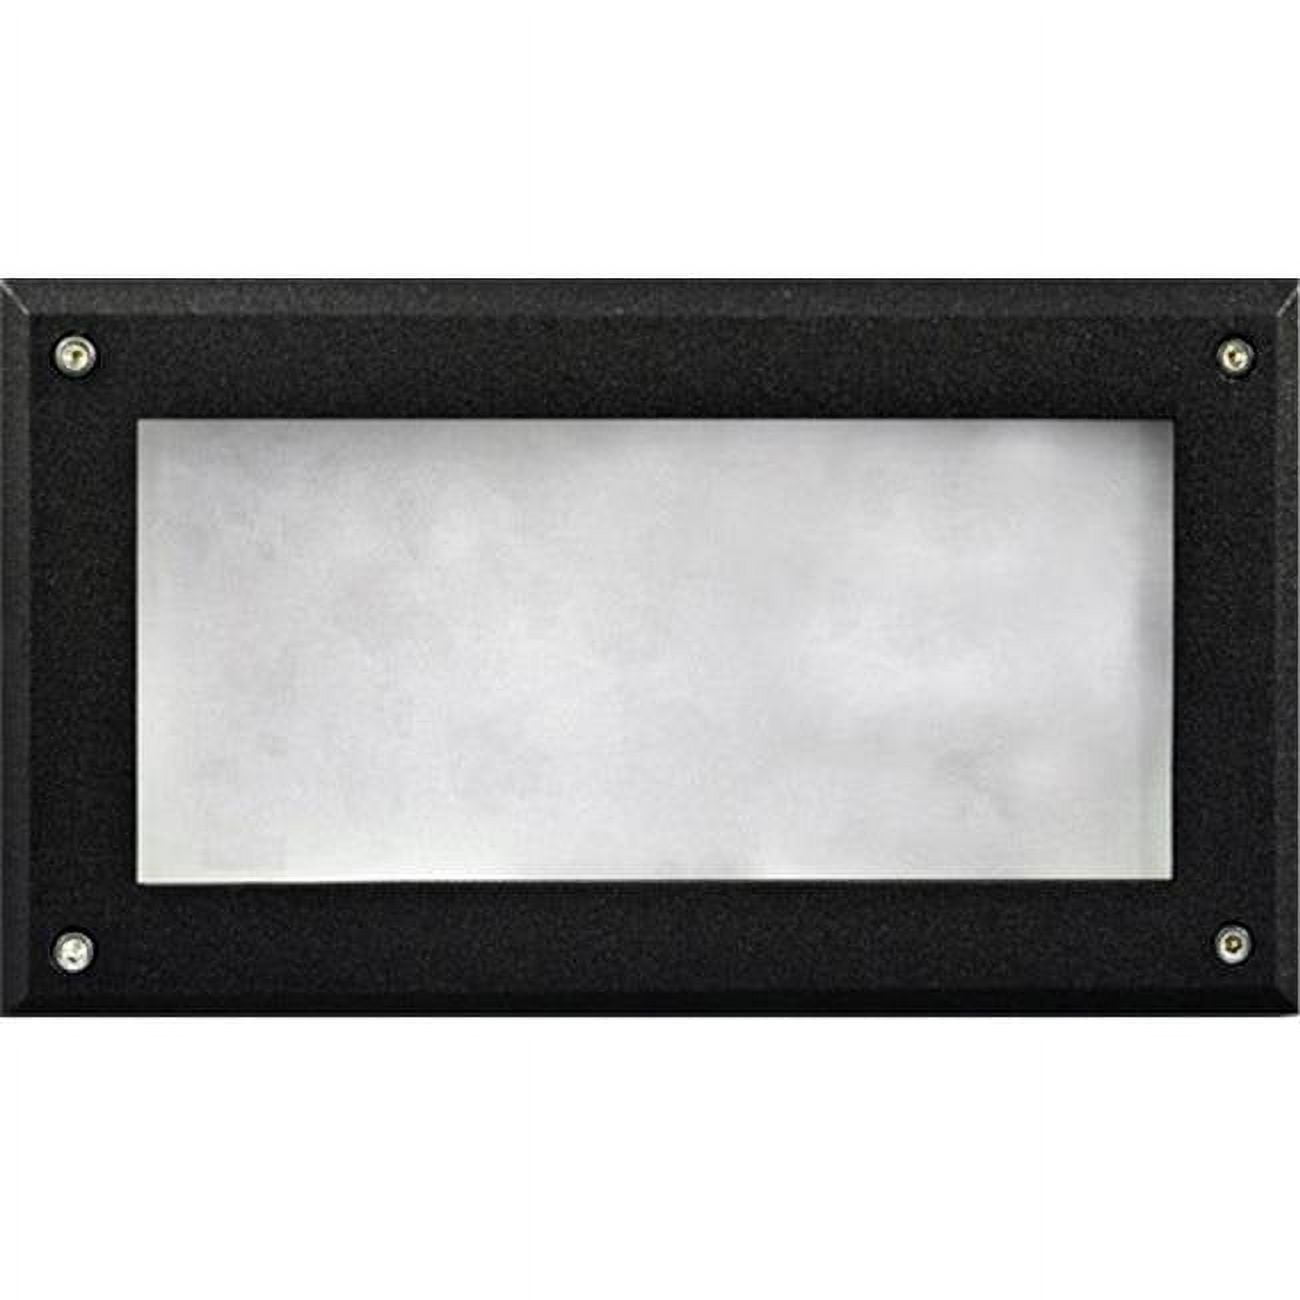 Picture of Dabmar Lighting DSL1001-B Recessed Open Face Brick, Step & Wall Light, Black - 5 x 8.90 x 3.15 in.